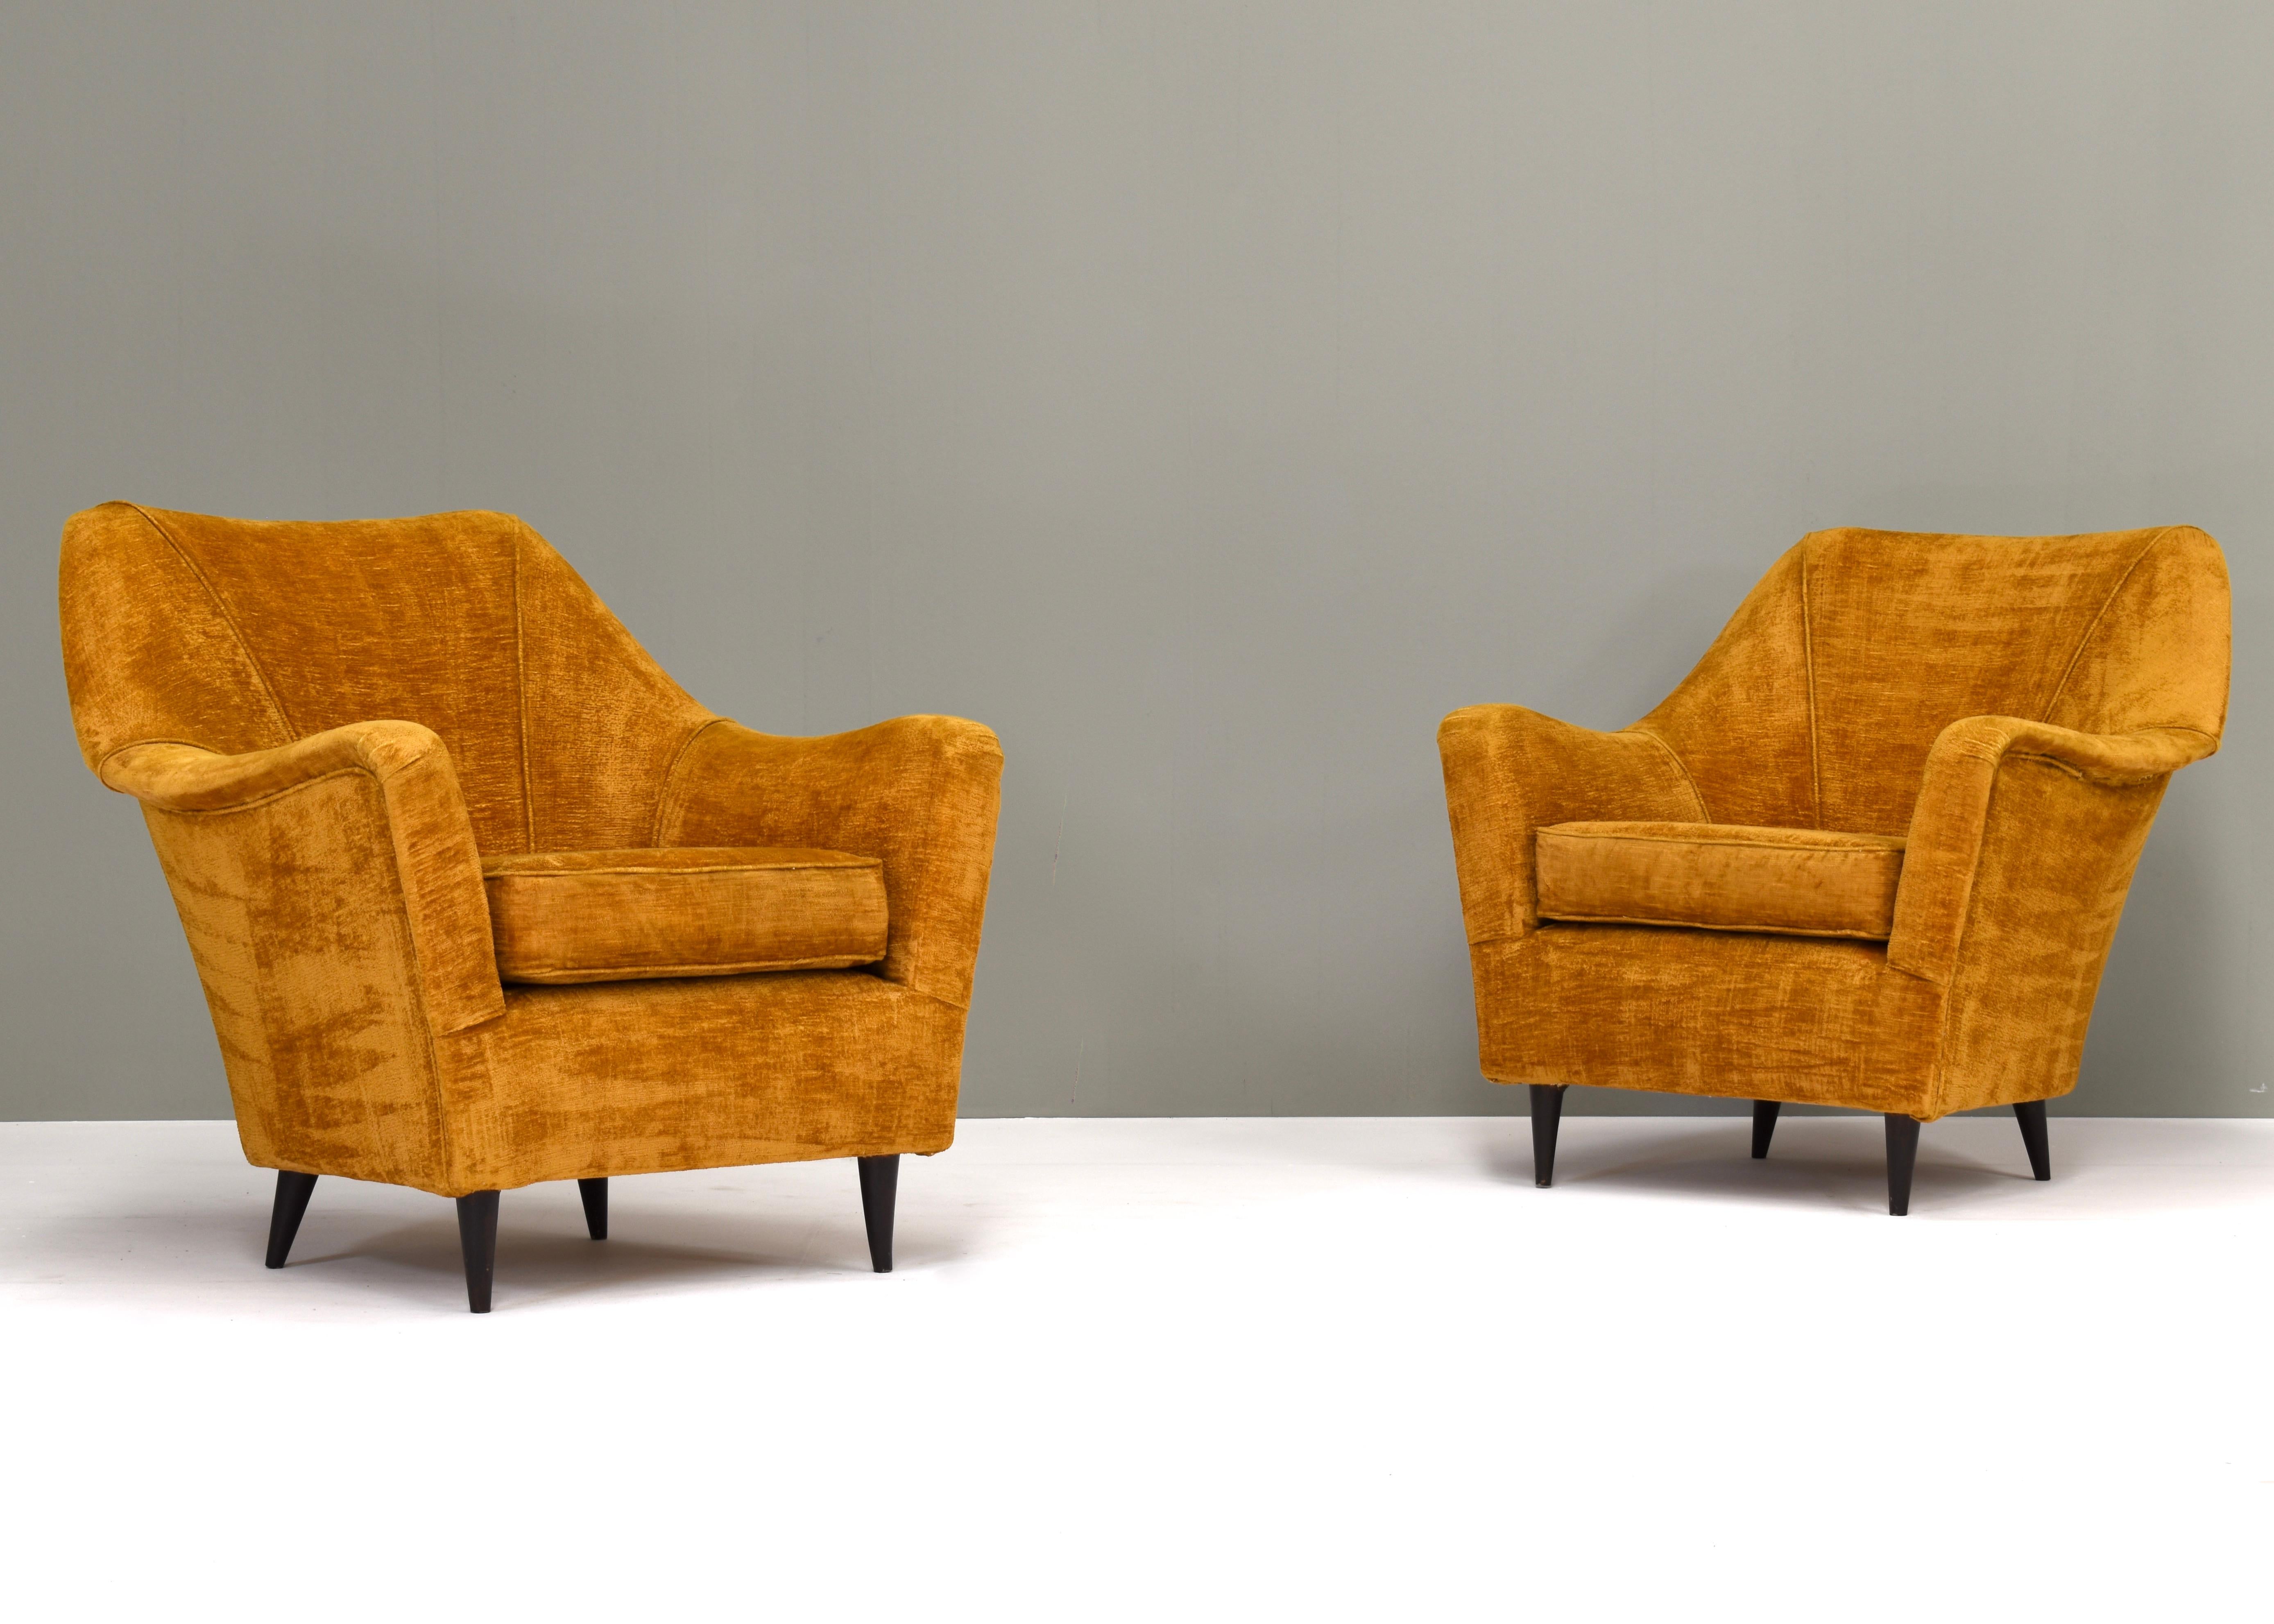 Pair of Italian 1950’s armchairs in original fabric. By or in the style of Ico Parisi (Ariberto Colombo).
The chairs have wear on the armrests and some edges. The fabric has been cleaned professionally. 

Designer: by or in the style of Ico